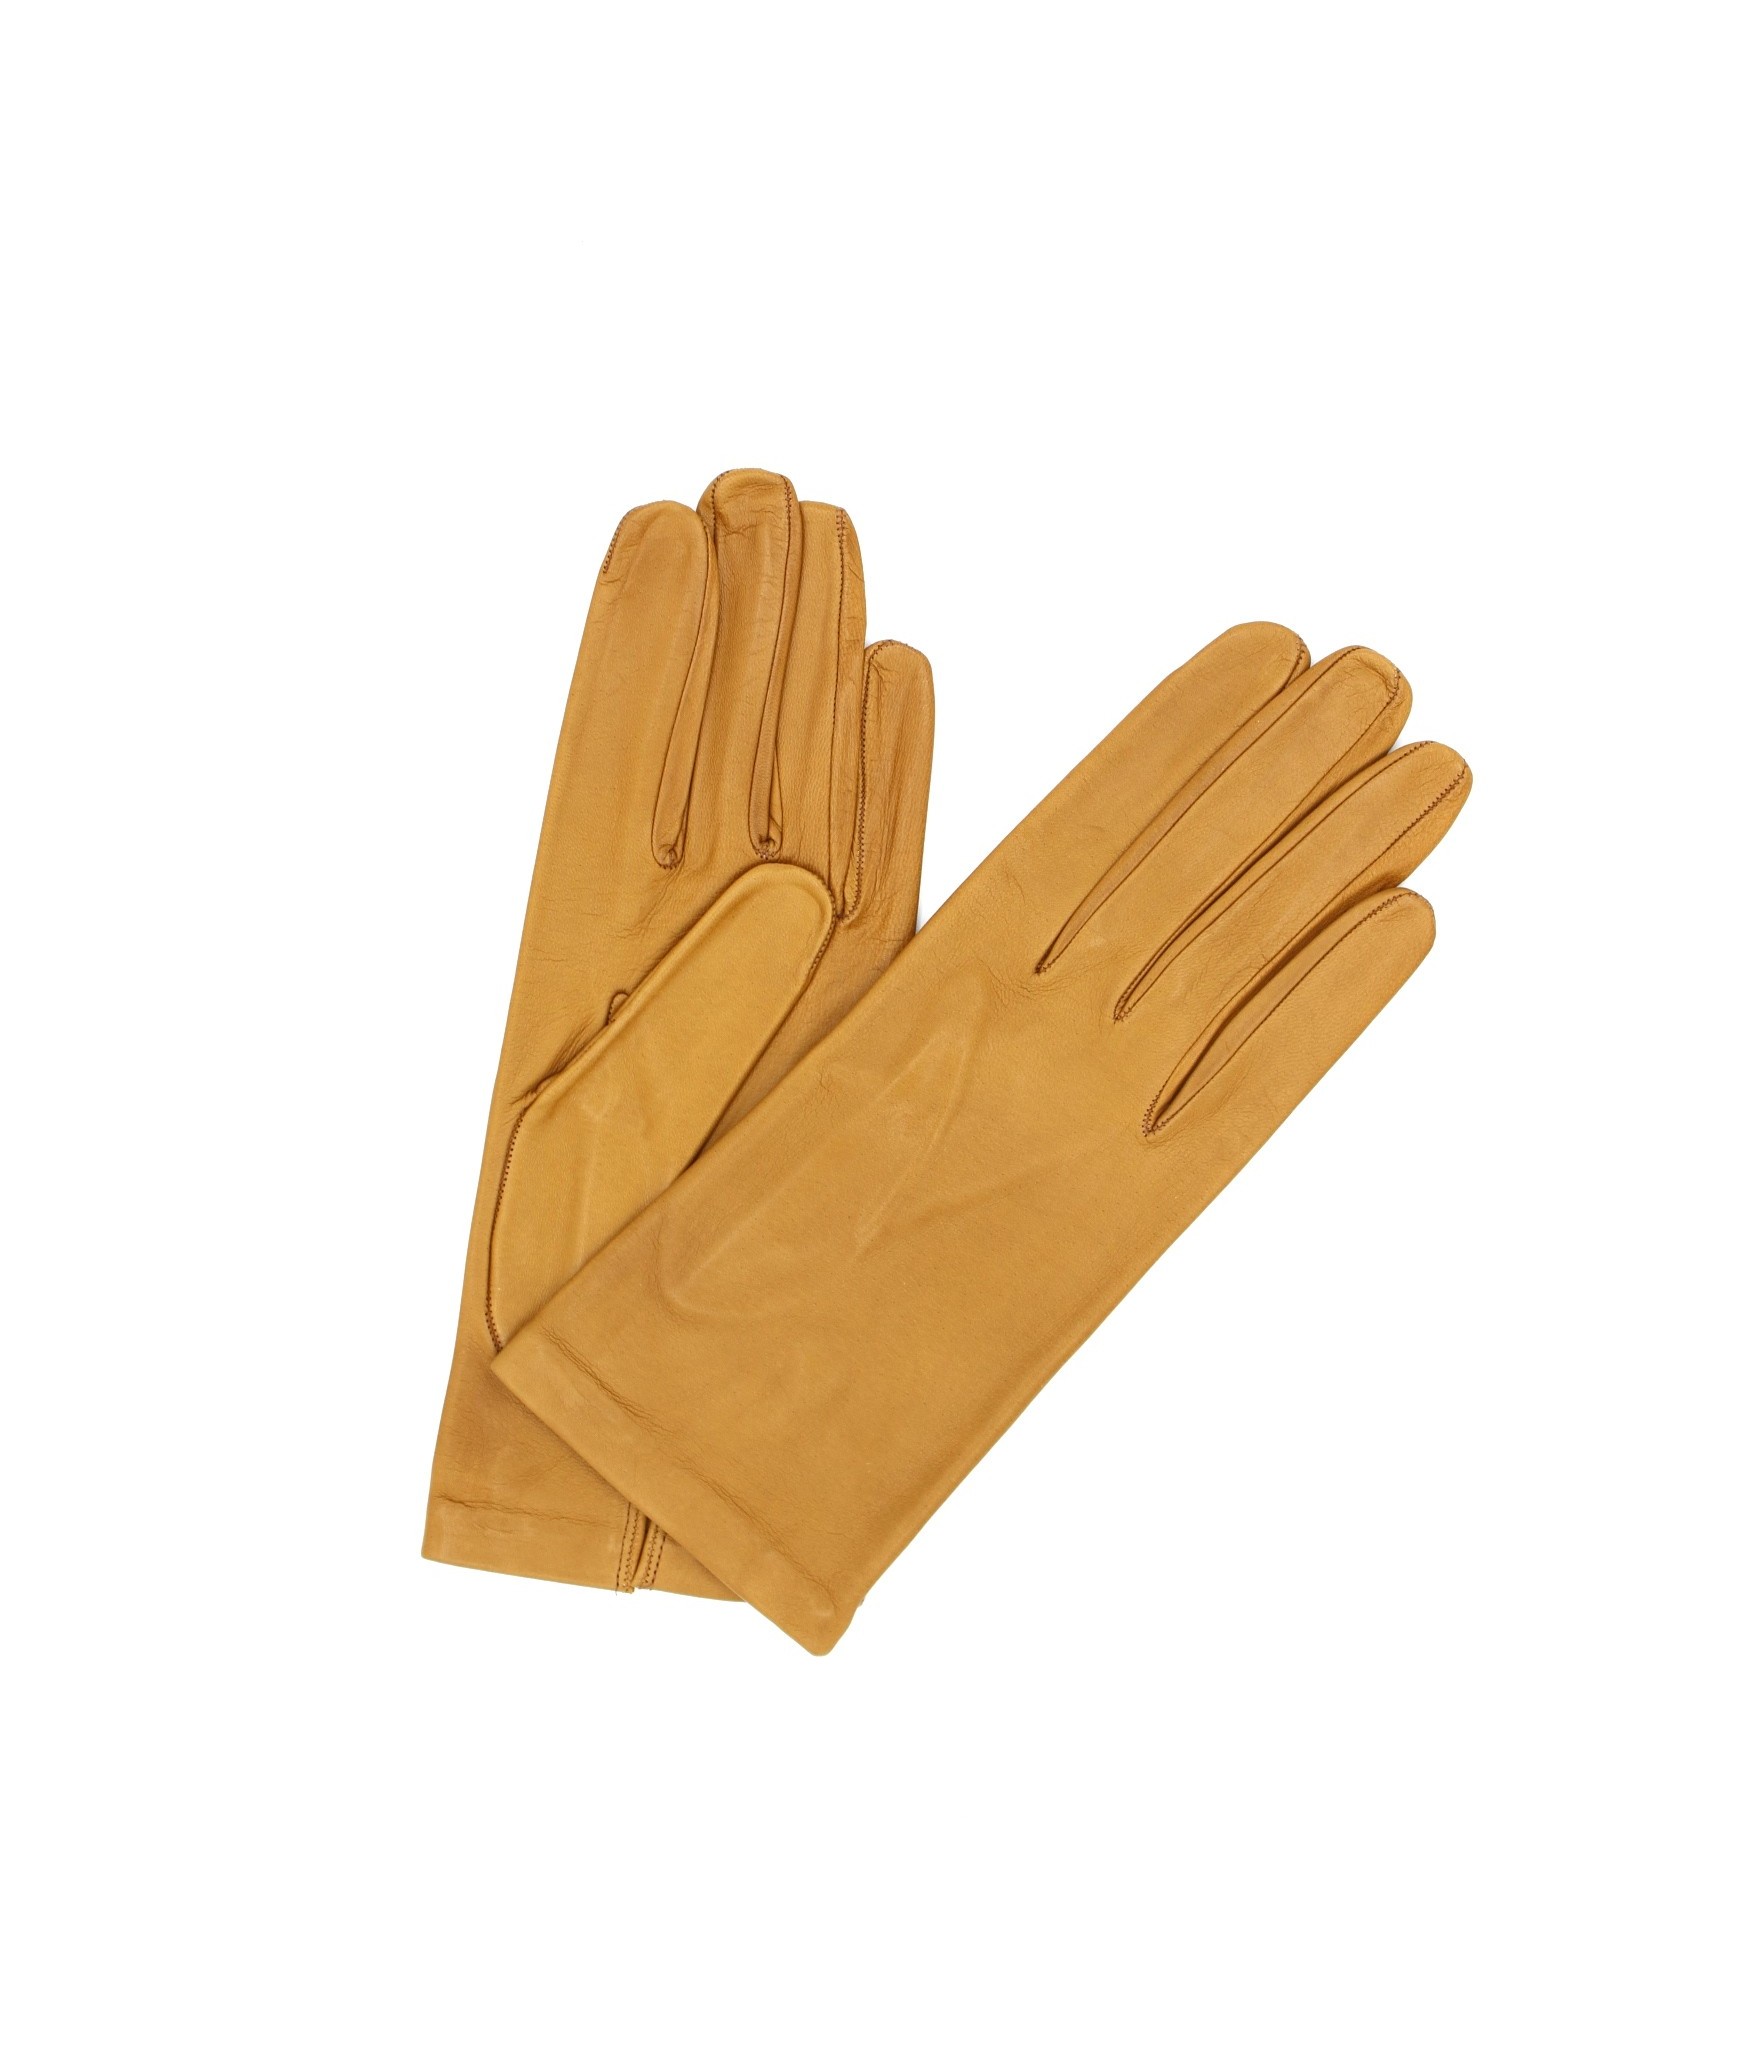 1002 Classic Kid Leather Gloves Silk Lined Camel 